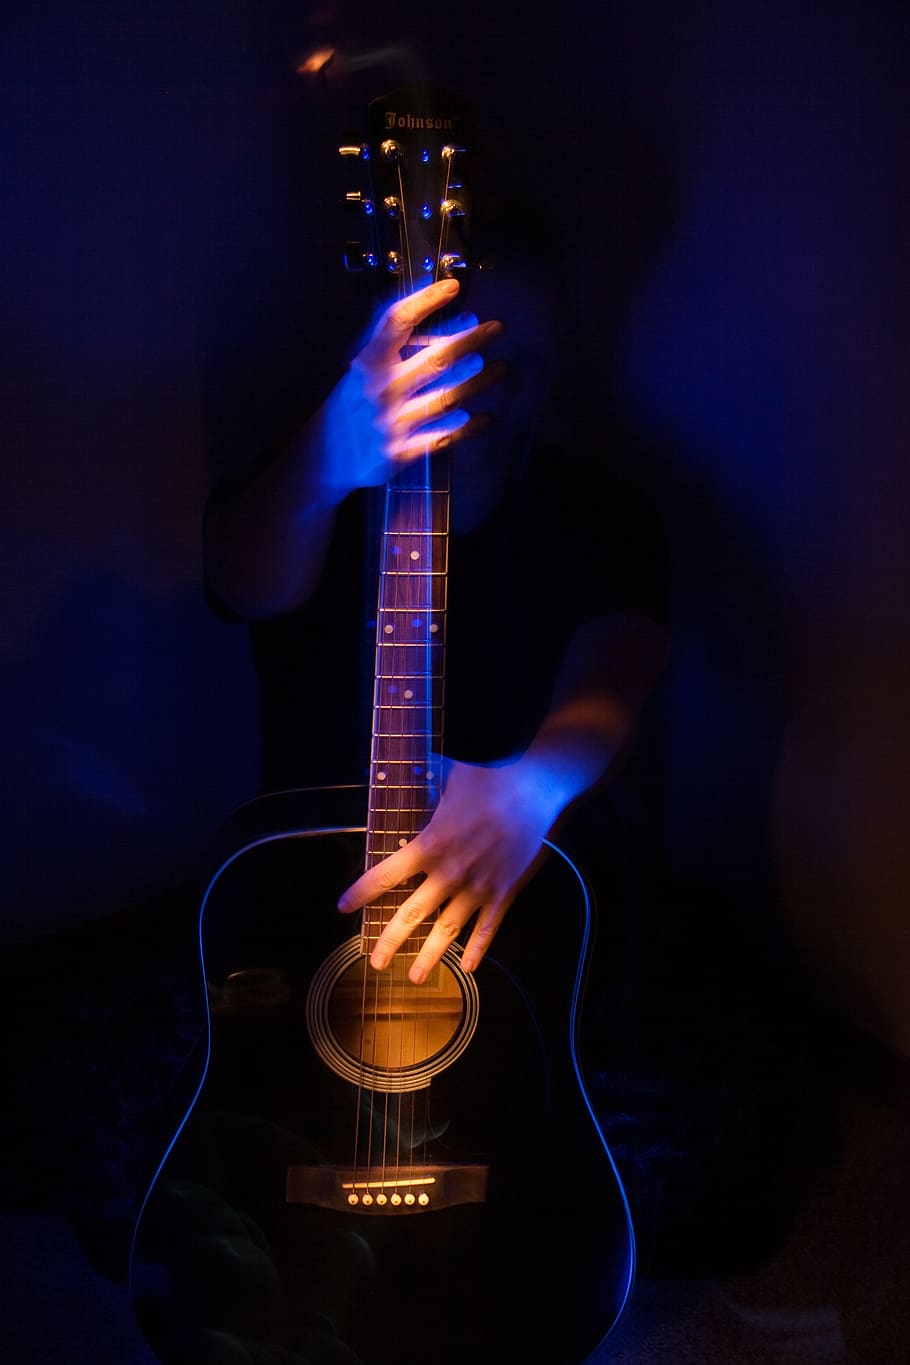 music, guitar, instrument, light, painting, musical instrument, string instrument, arts culture and entertainment, artist, musician